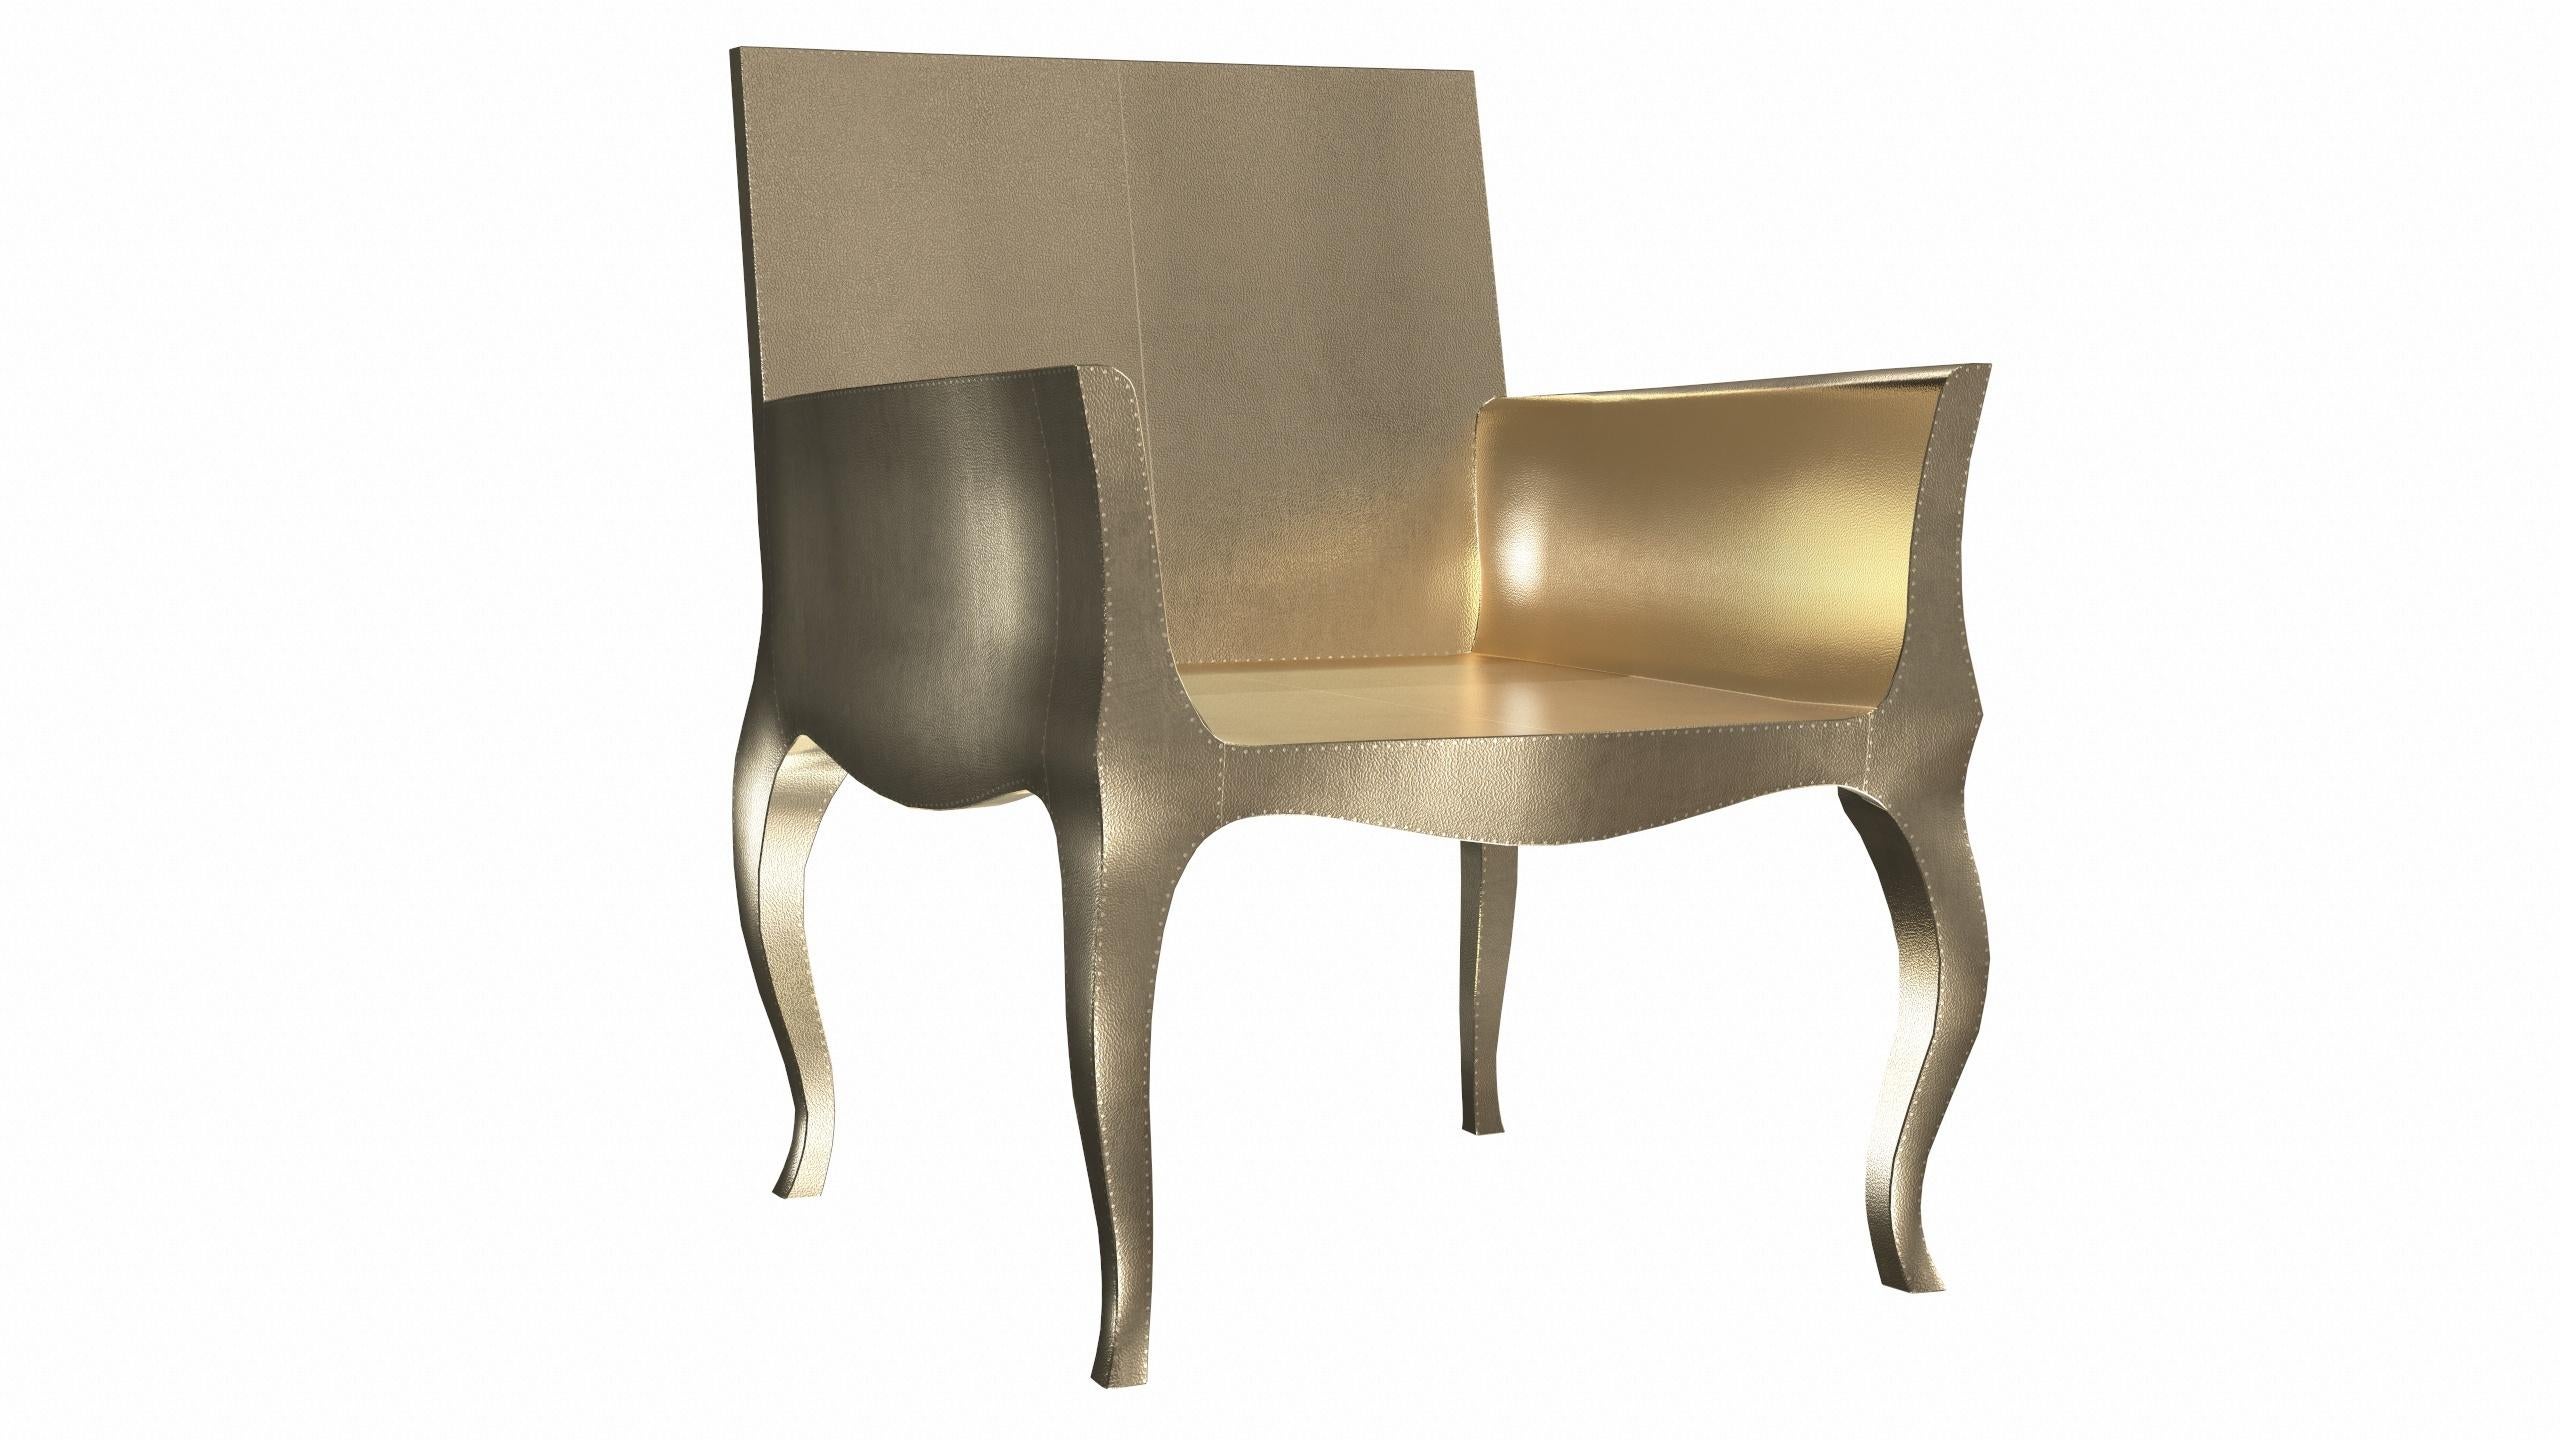 Hand-Carved Art Deco Desk Chair  Fine Hammered in Brass by Paul Mathieu For Sale